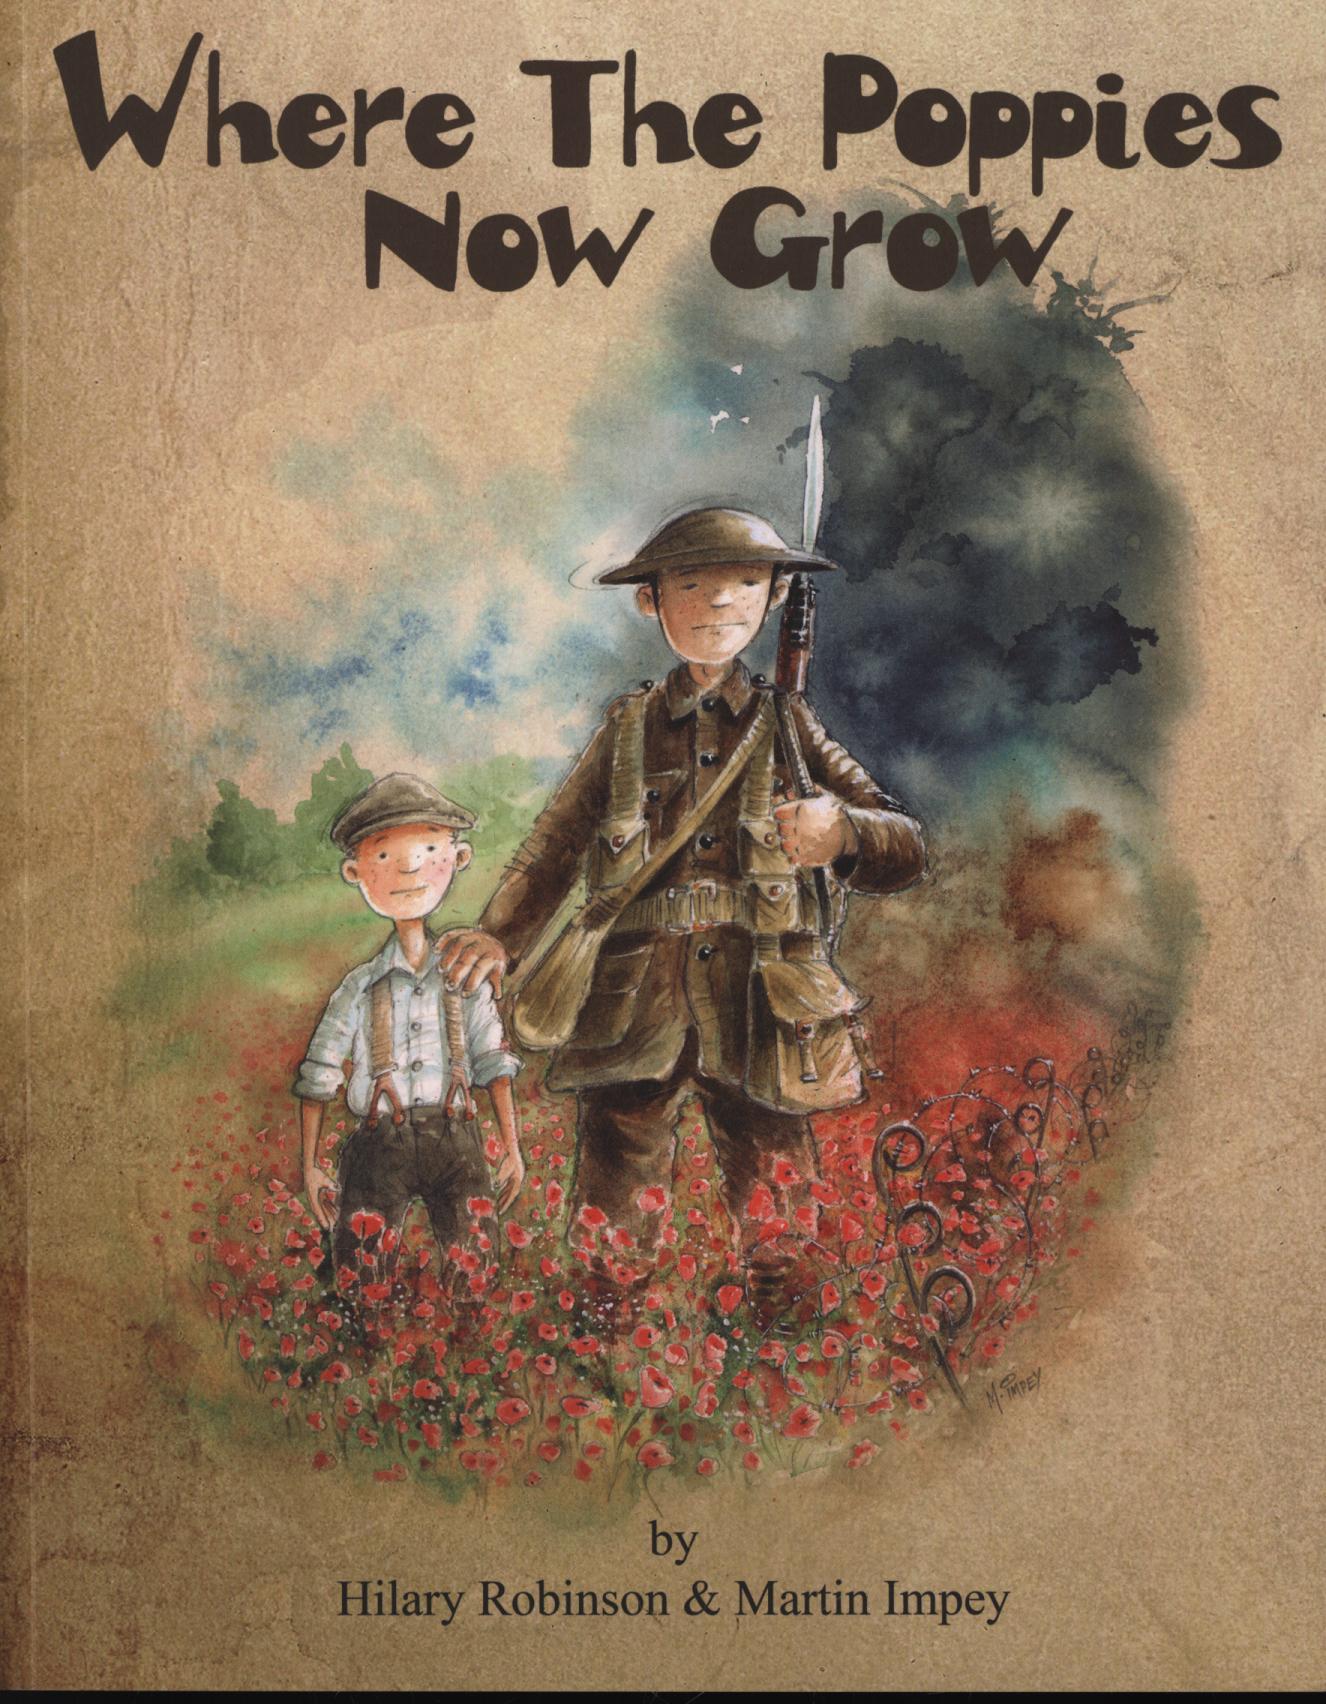 Where The Poppies Now Grow